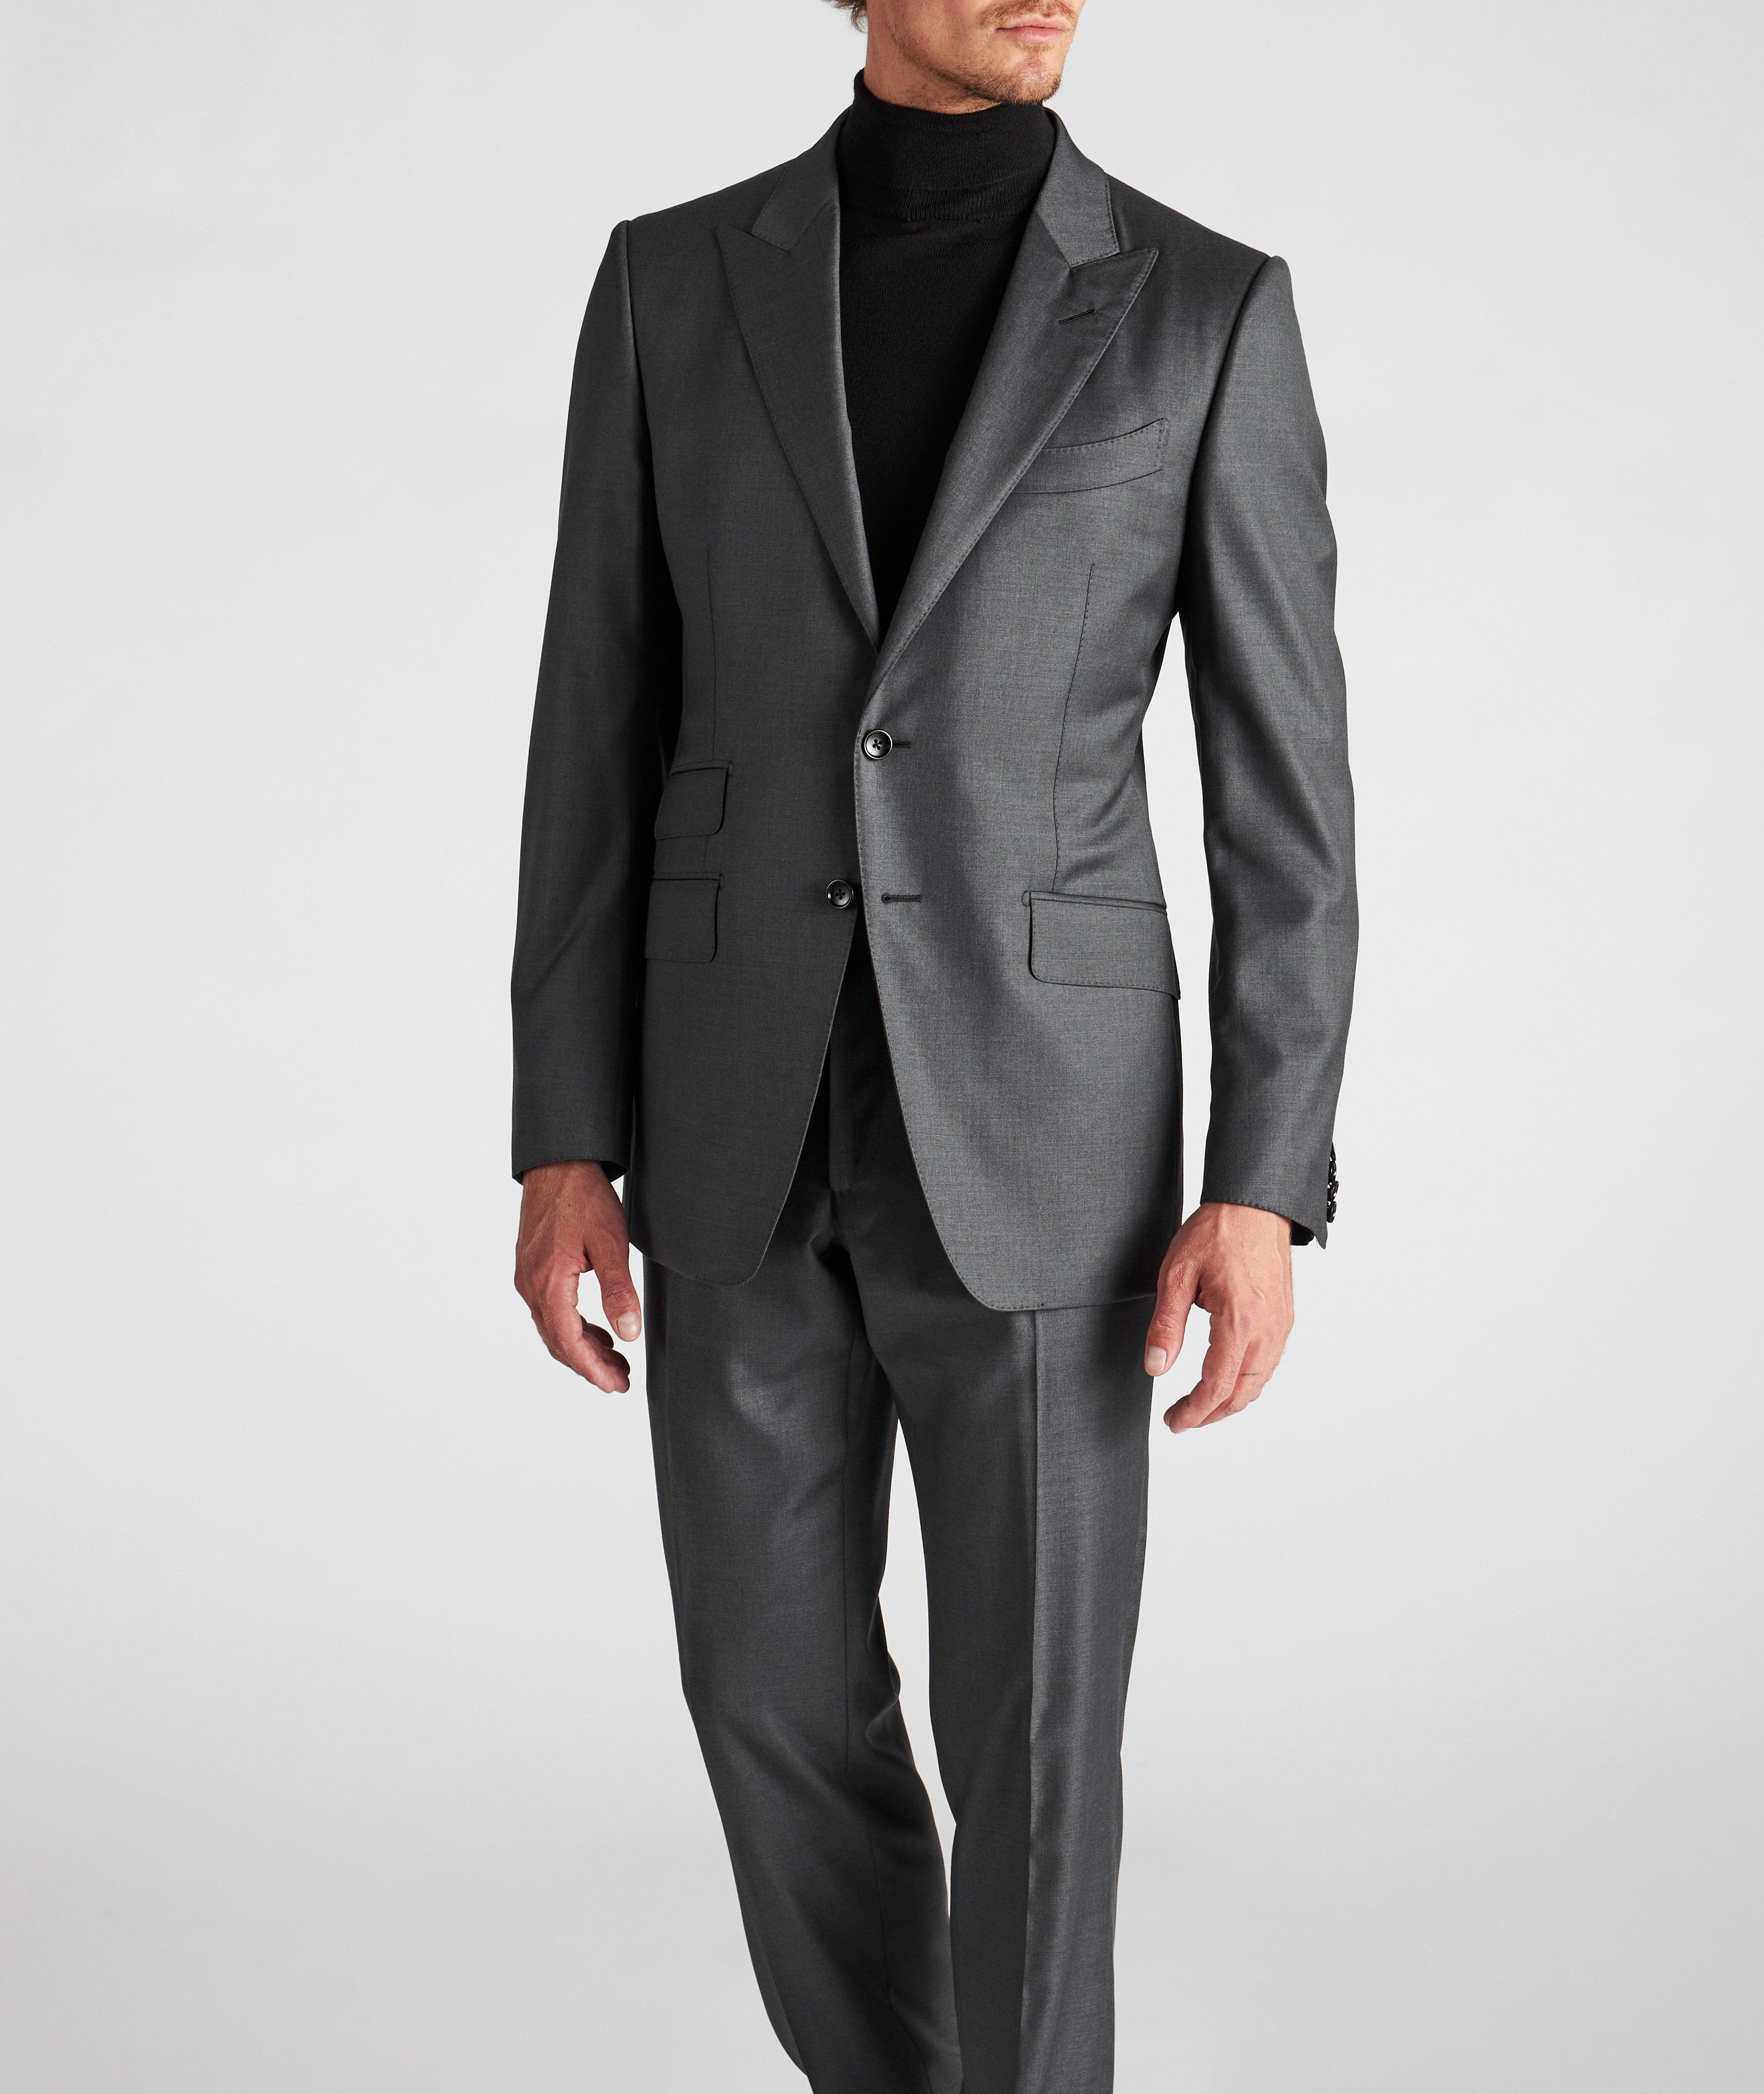 O'Connor Solid Wool Suit image 1